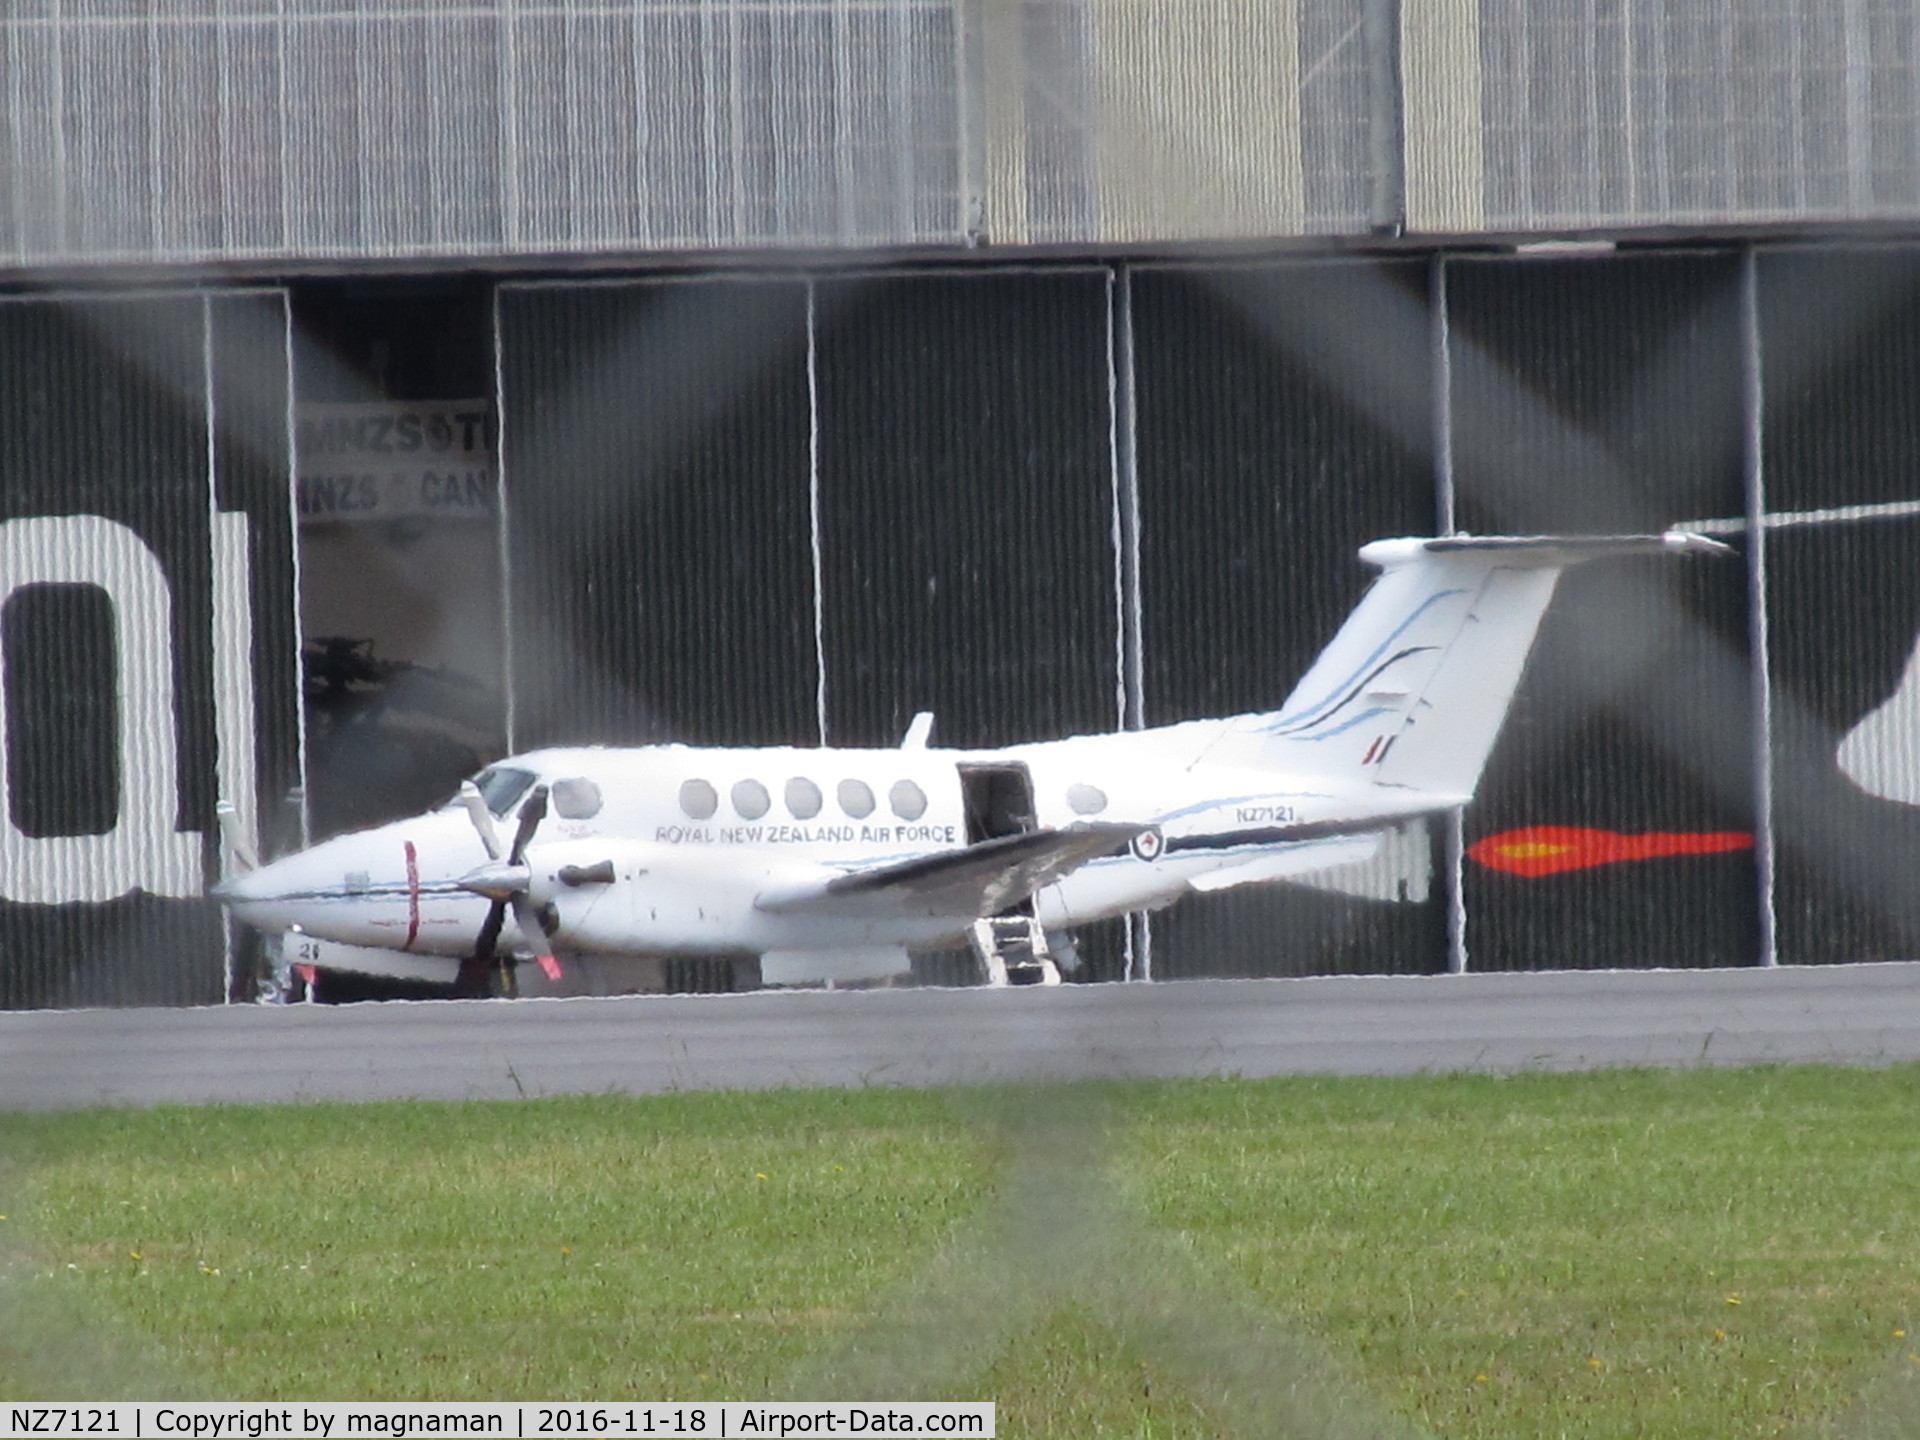 NZ7121, 2006 Raytheon B200 King Air C/N BB-1847, long range through perimeter fence on hot day!
At Whenuapai west of Auckland